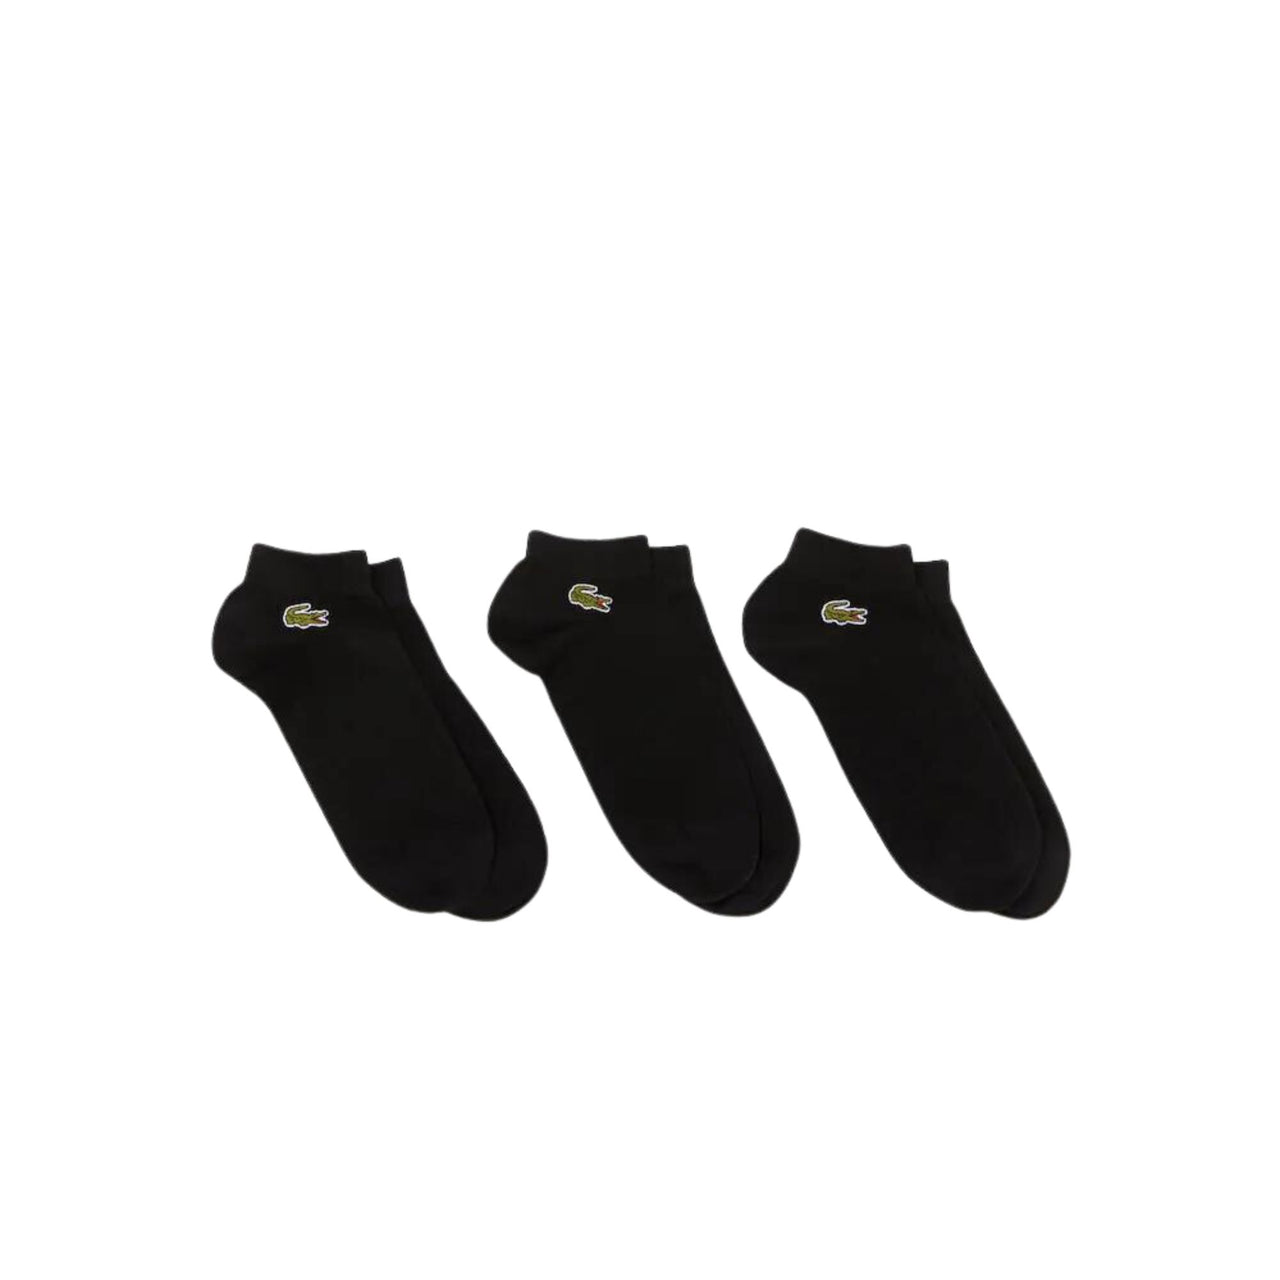 Calcetines Lacoste Hombre Ra4183 - Socks